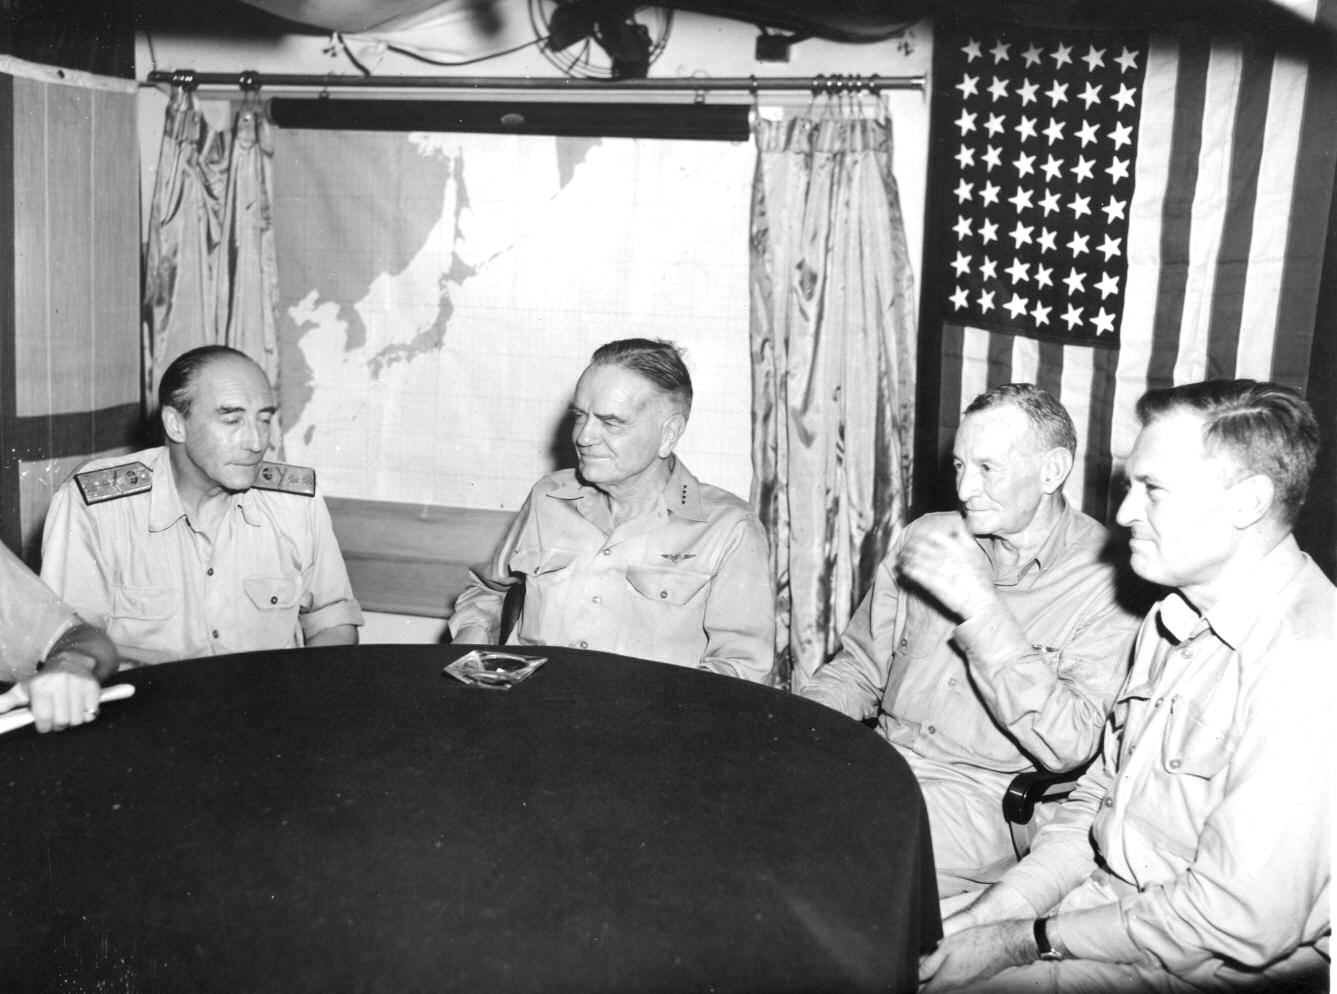 Aboard his flagship, USS Missouri, Admiral William Halsey receives Royal Navy Vice Admiral Sir Bernard Rawlings, Vice Admiral John McCain, and Rear Admiral Wilder Baker to celebrate Japan’s surrender, 22 Aug 1945.